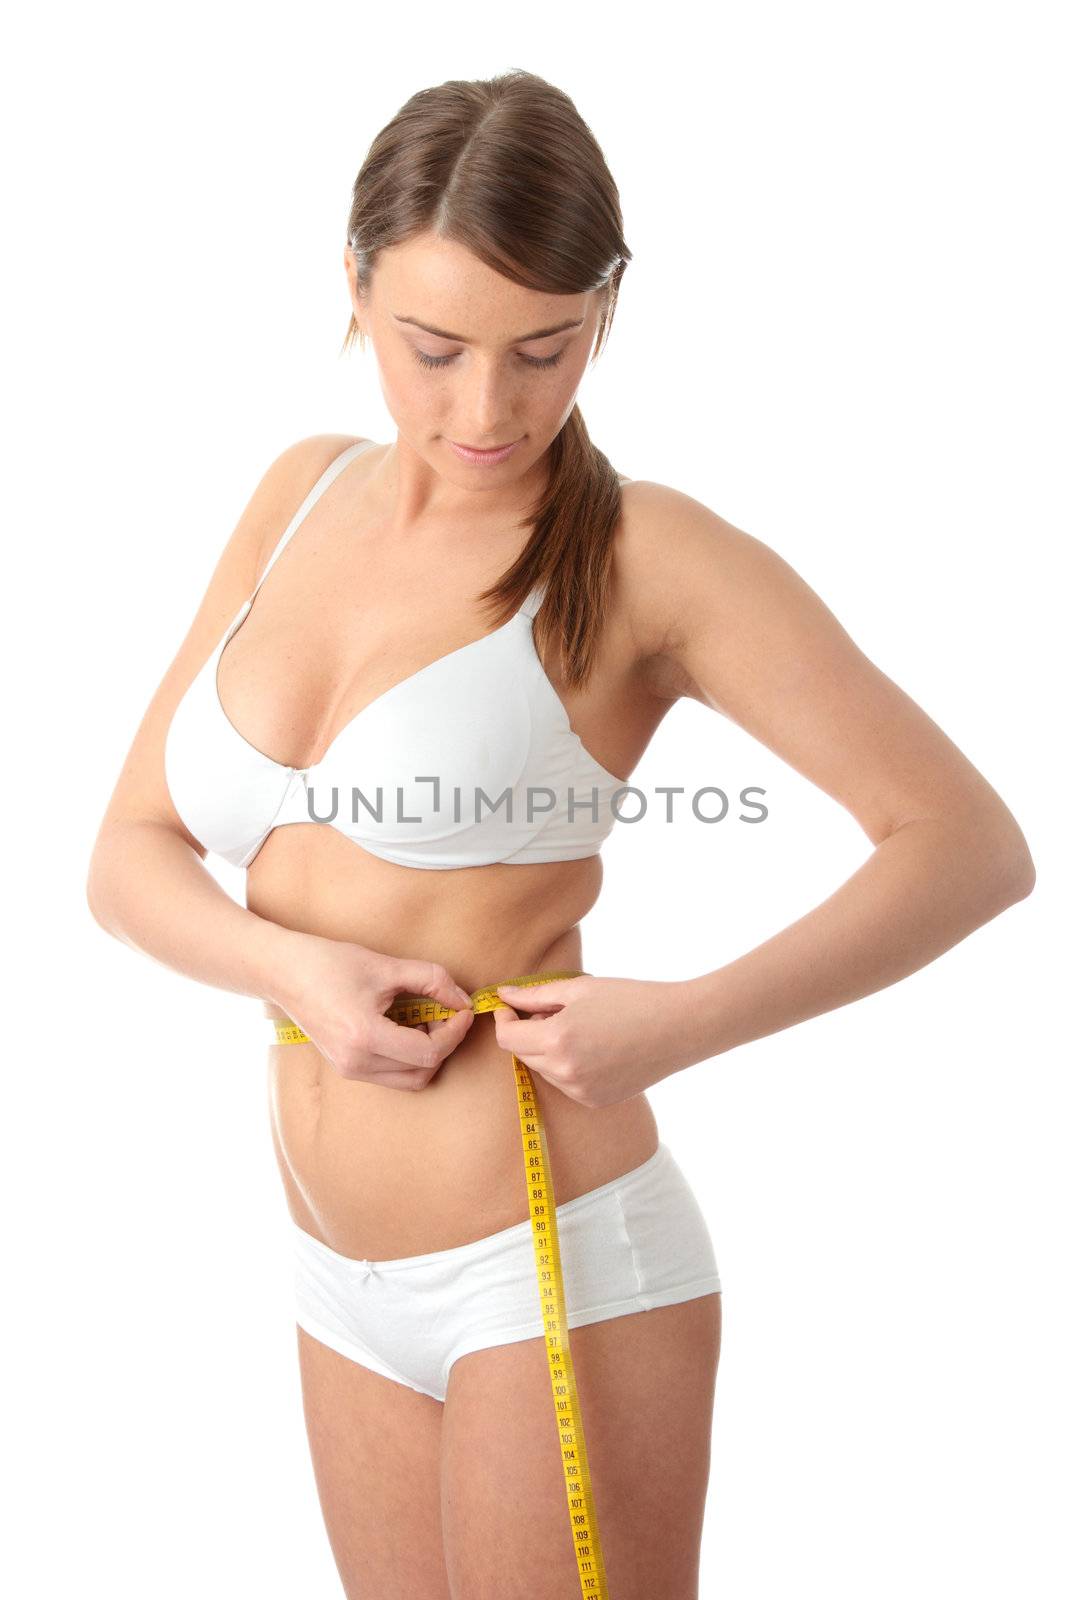 Yong caucasian woman measuring her waist, isolated on white background